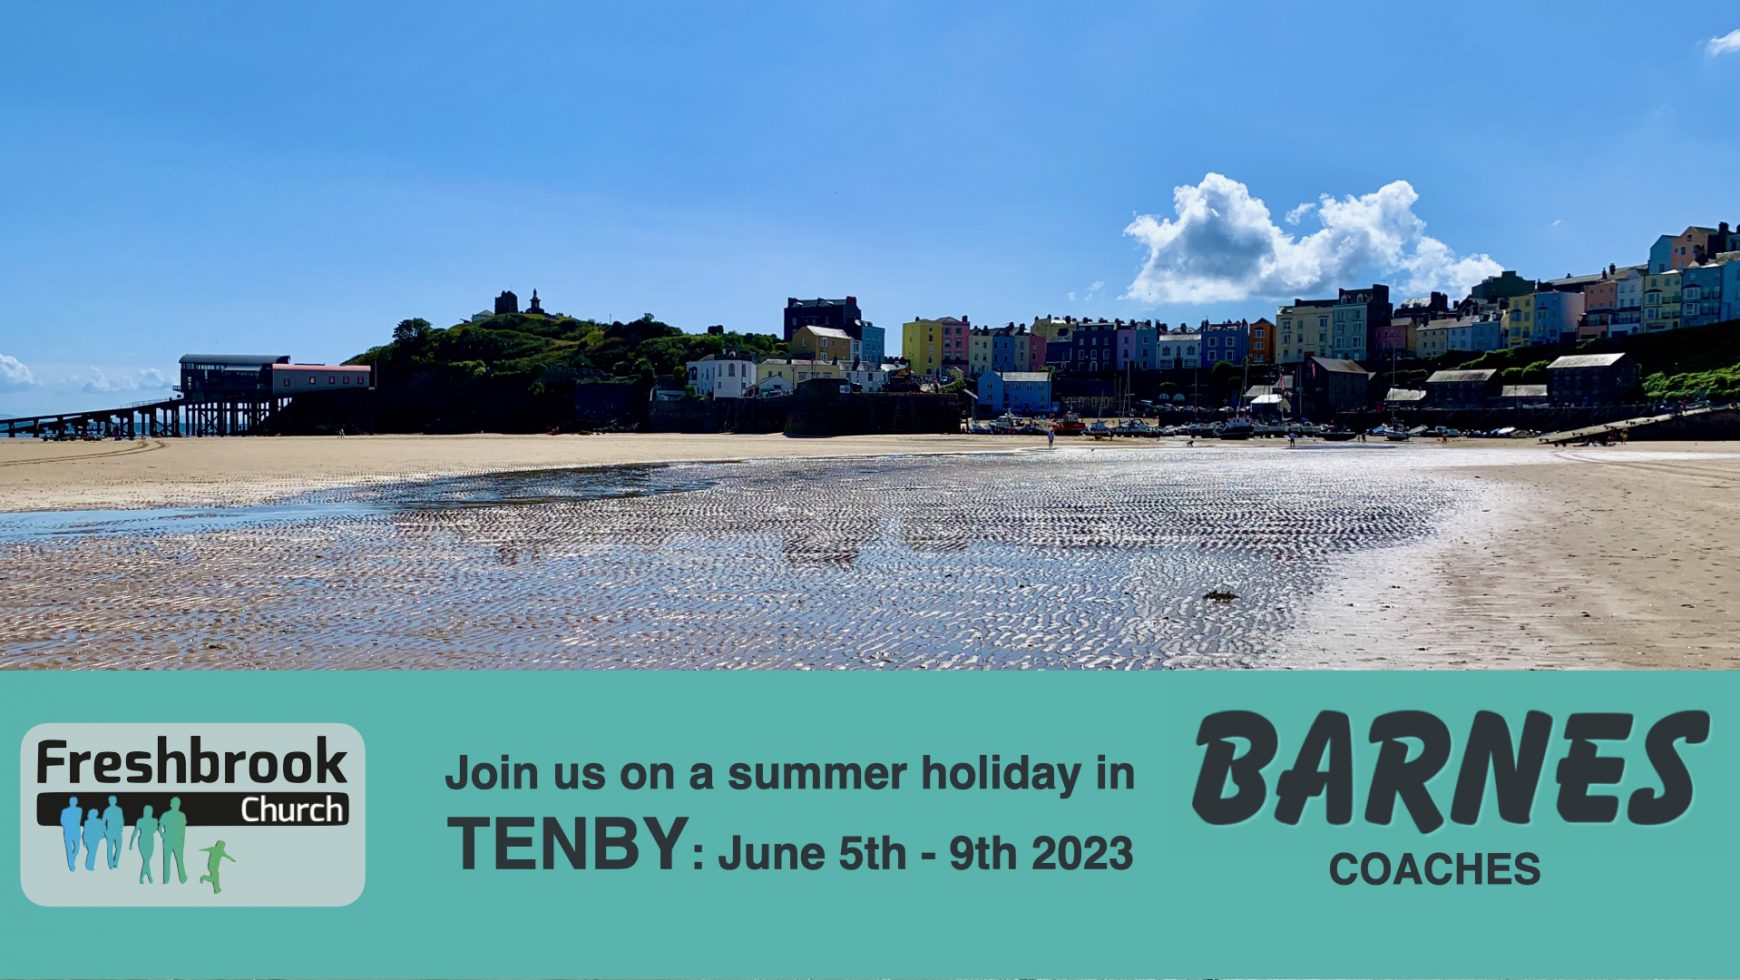 Holiday in Tenby